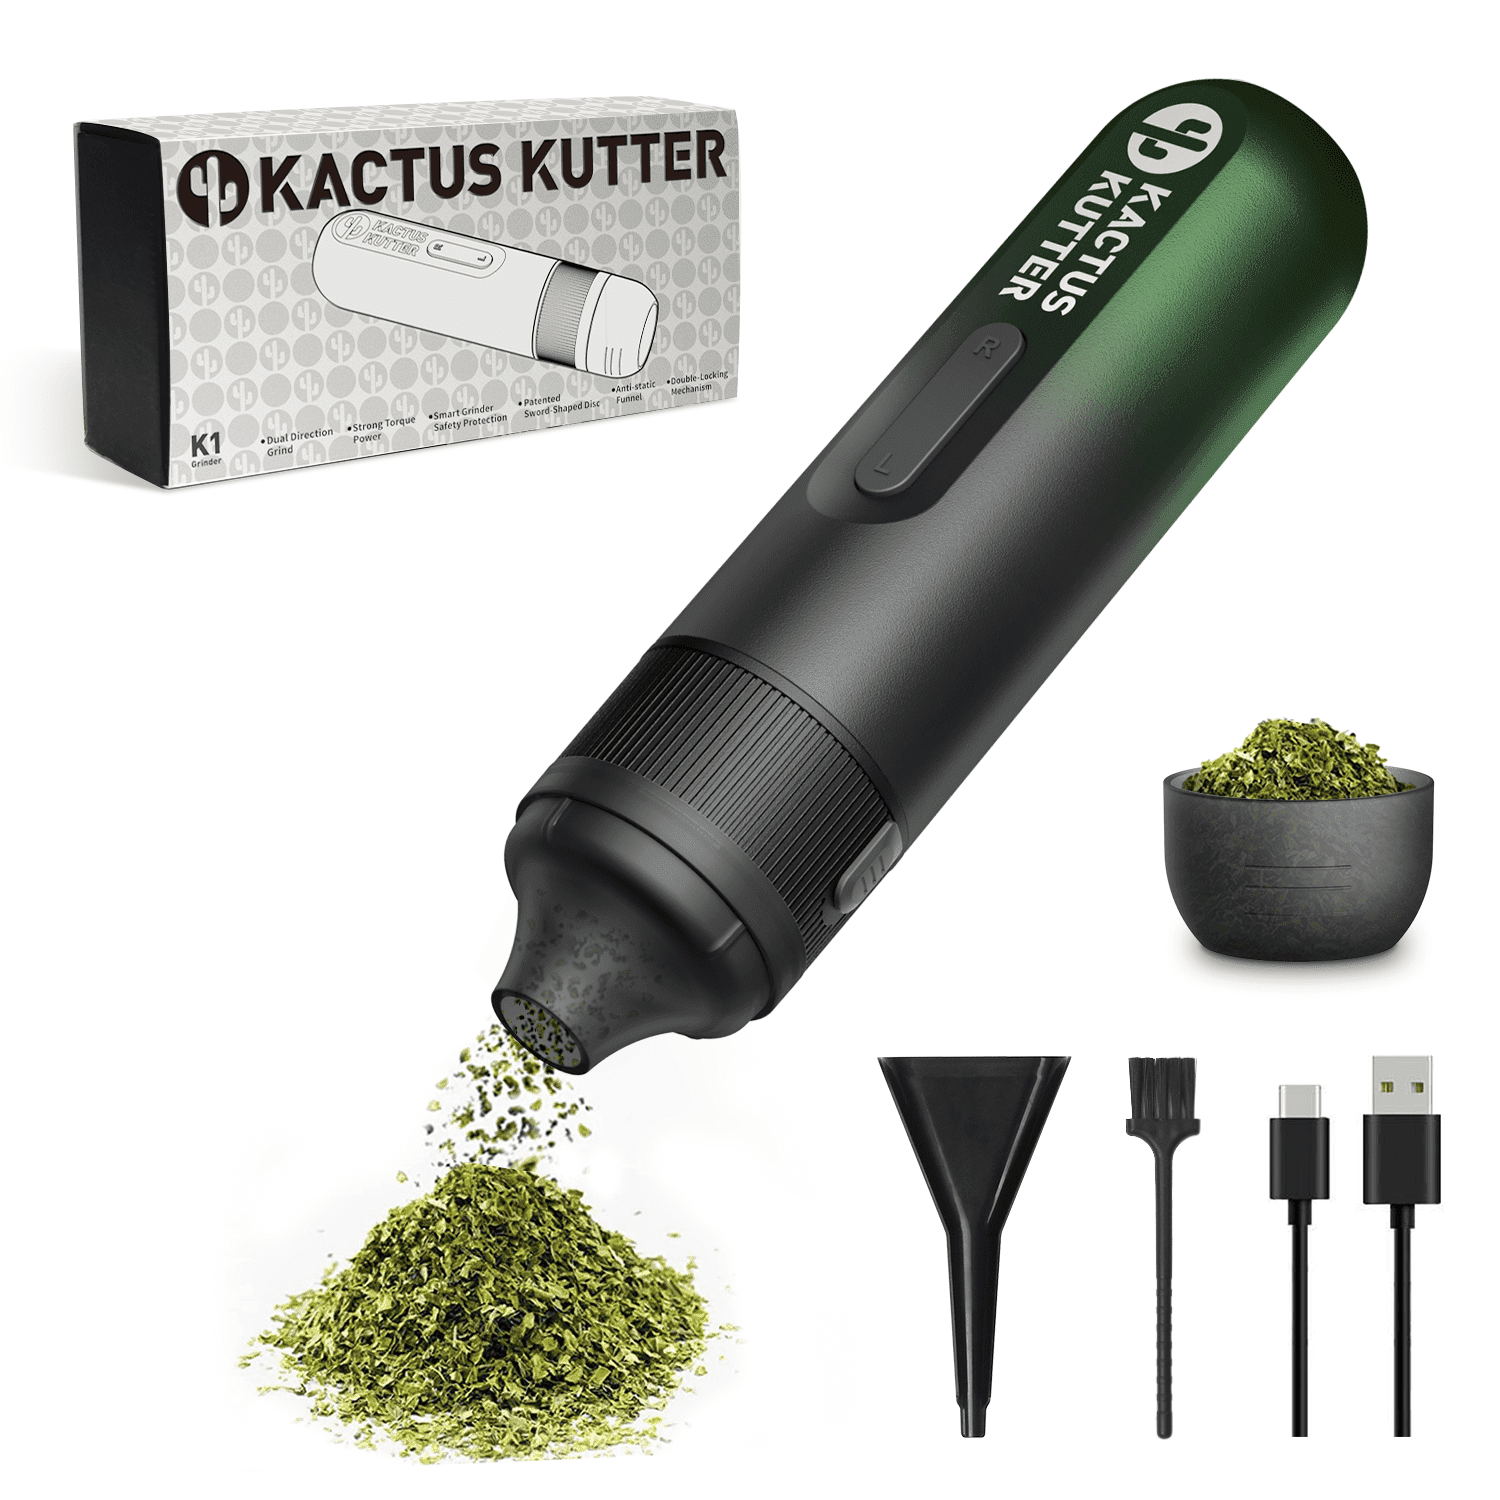 KactusKutter K1 Electric Herb Grinder Battery Powered Automatic Portab